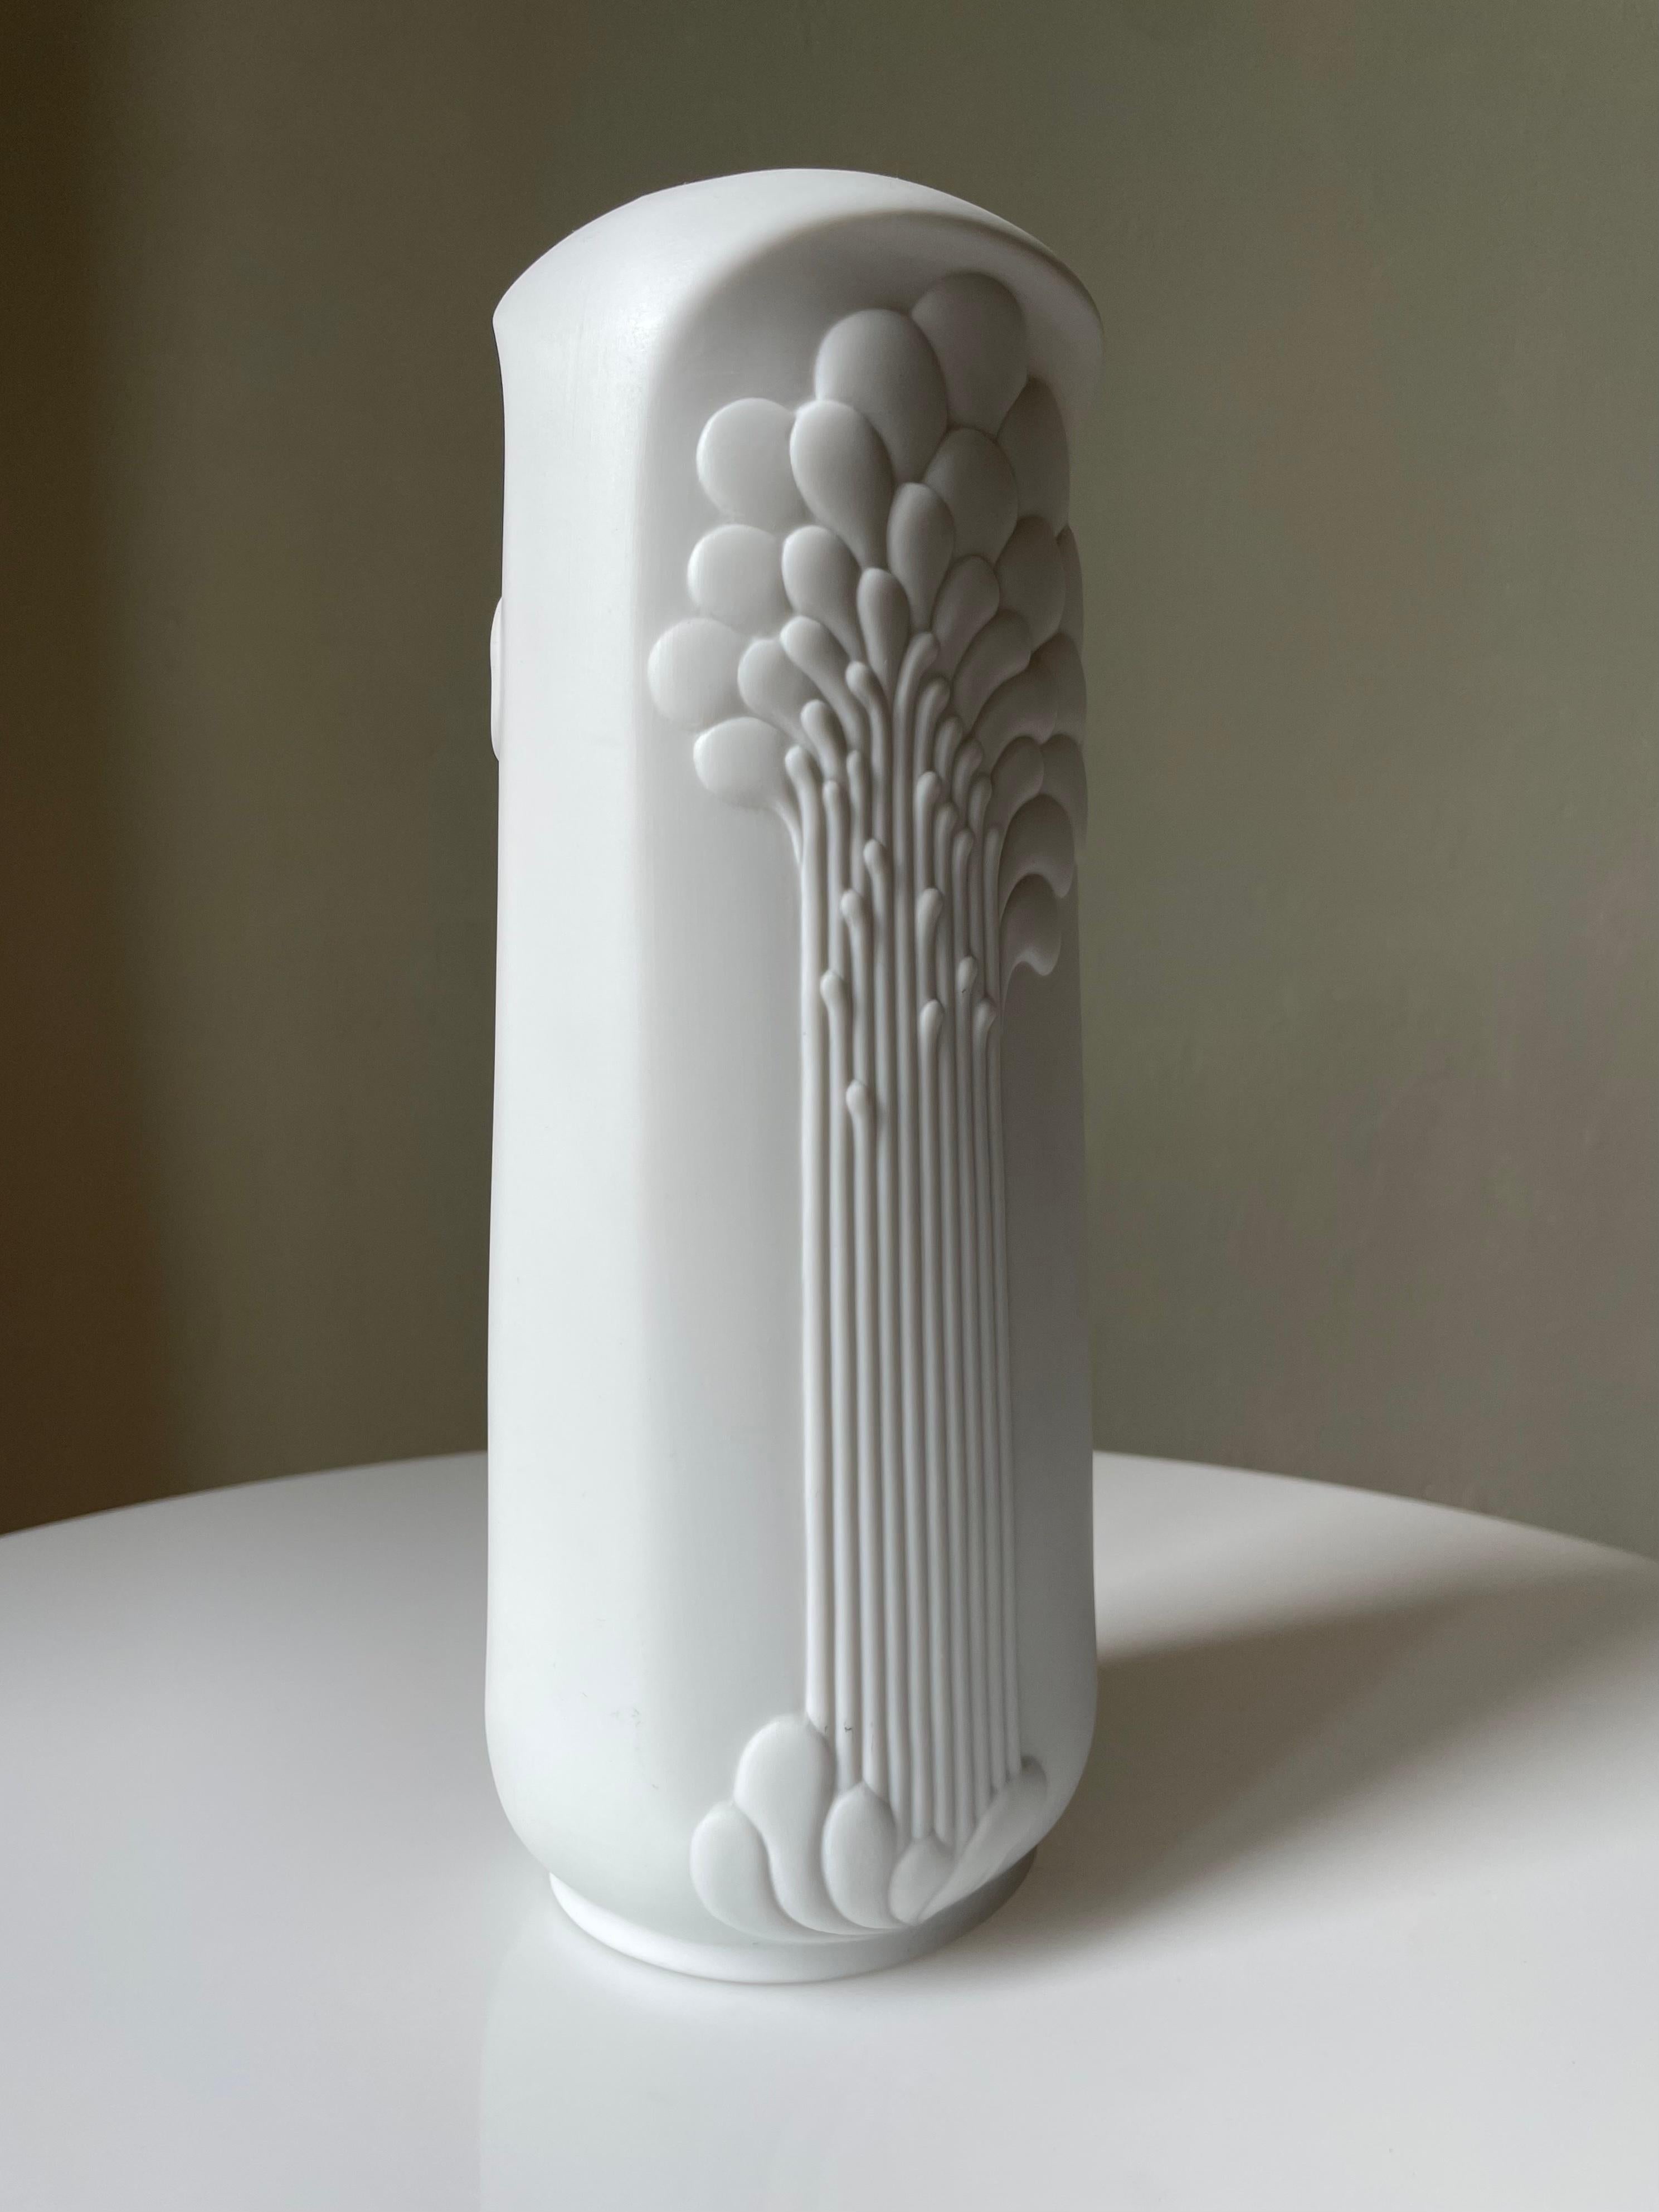 Tall Modern Op Art vase of high quality matte bisque porcelain. Stunning organic art deco relief decor on the bone white exterior, and shiny glaze on the smooth inside. Designed by Michaela Frey for Alboth & Kaiser Porcelain in the 1960s. Signed,